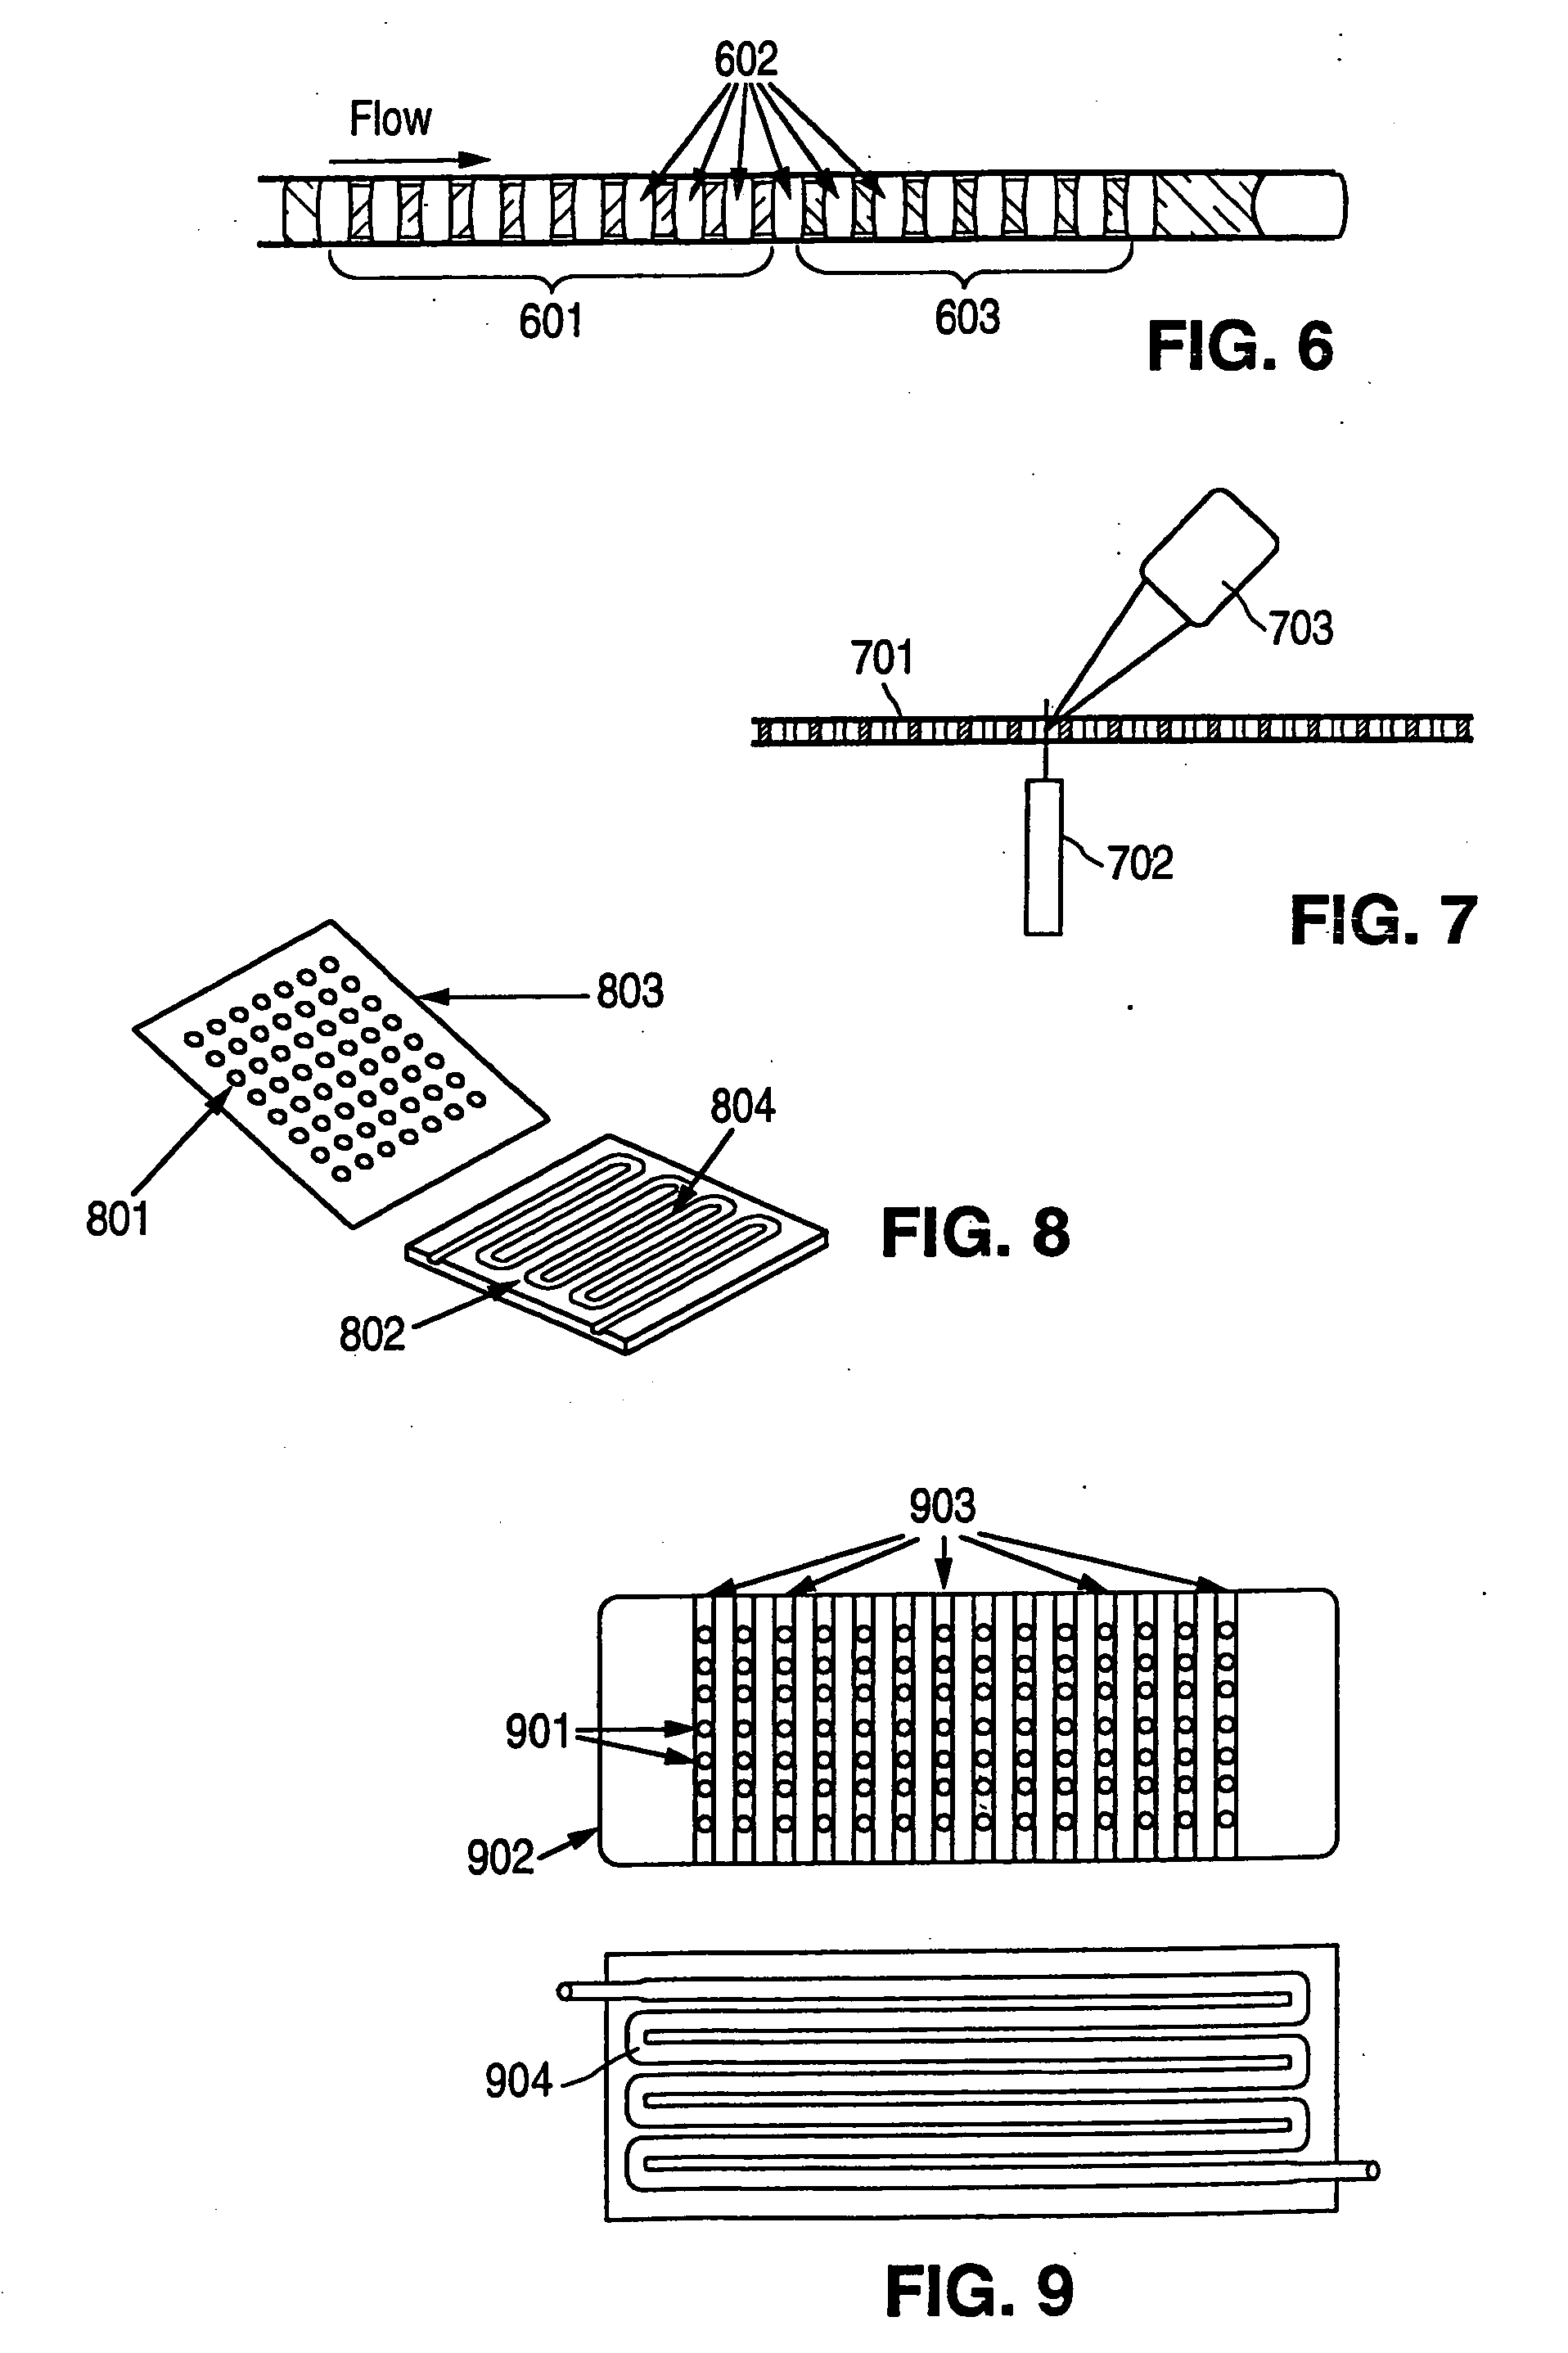 Capillary array and related methods